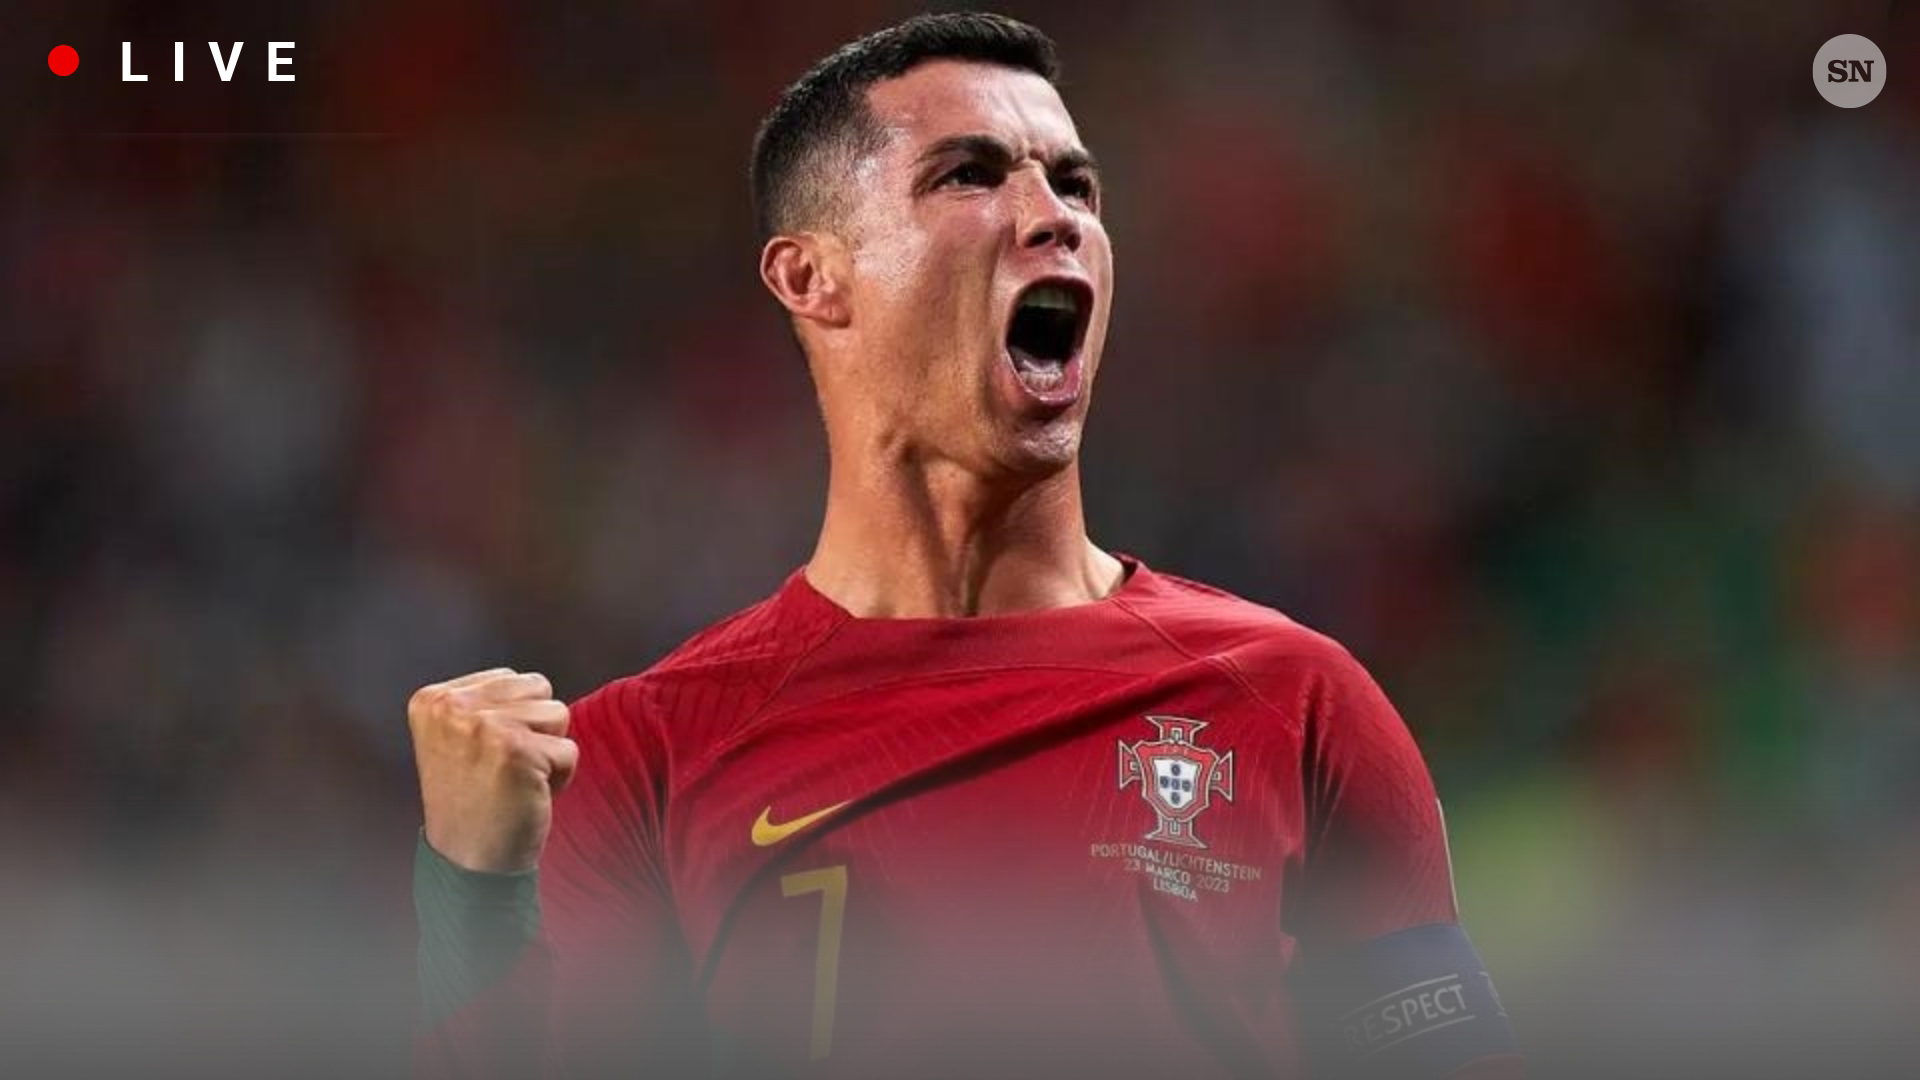 Slovakia vs Portugal live score, updates, lineups, and result from Euro